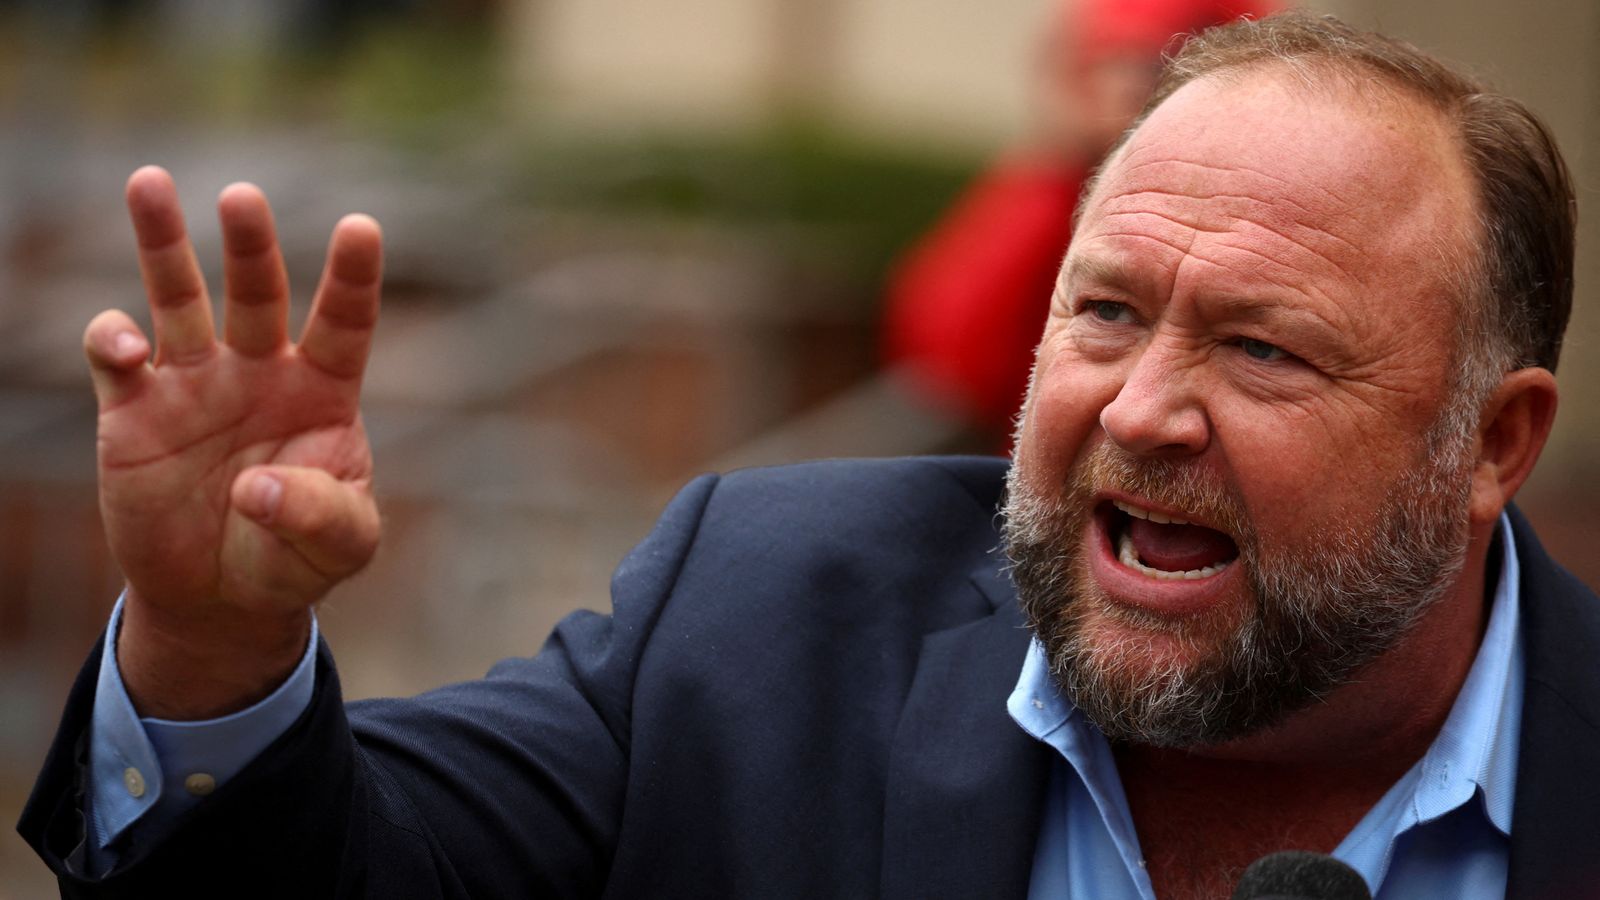 Alex Jones: US conspiracy theorist ordered to pay 5m to Sandy Hook massacre victims he defamed